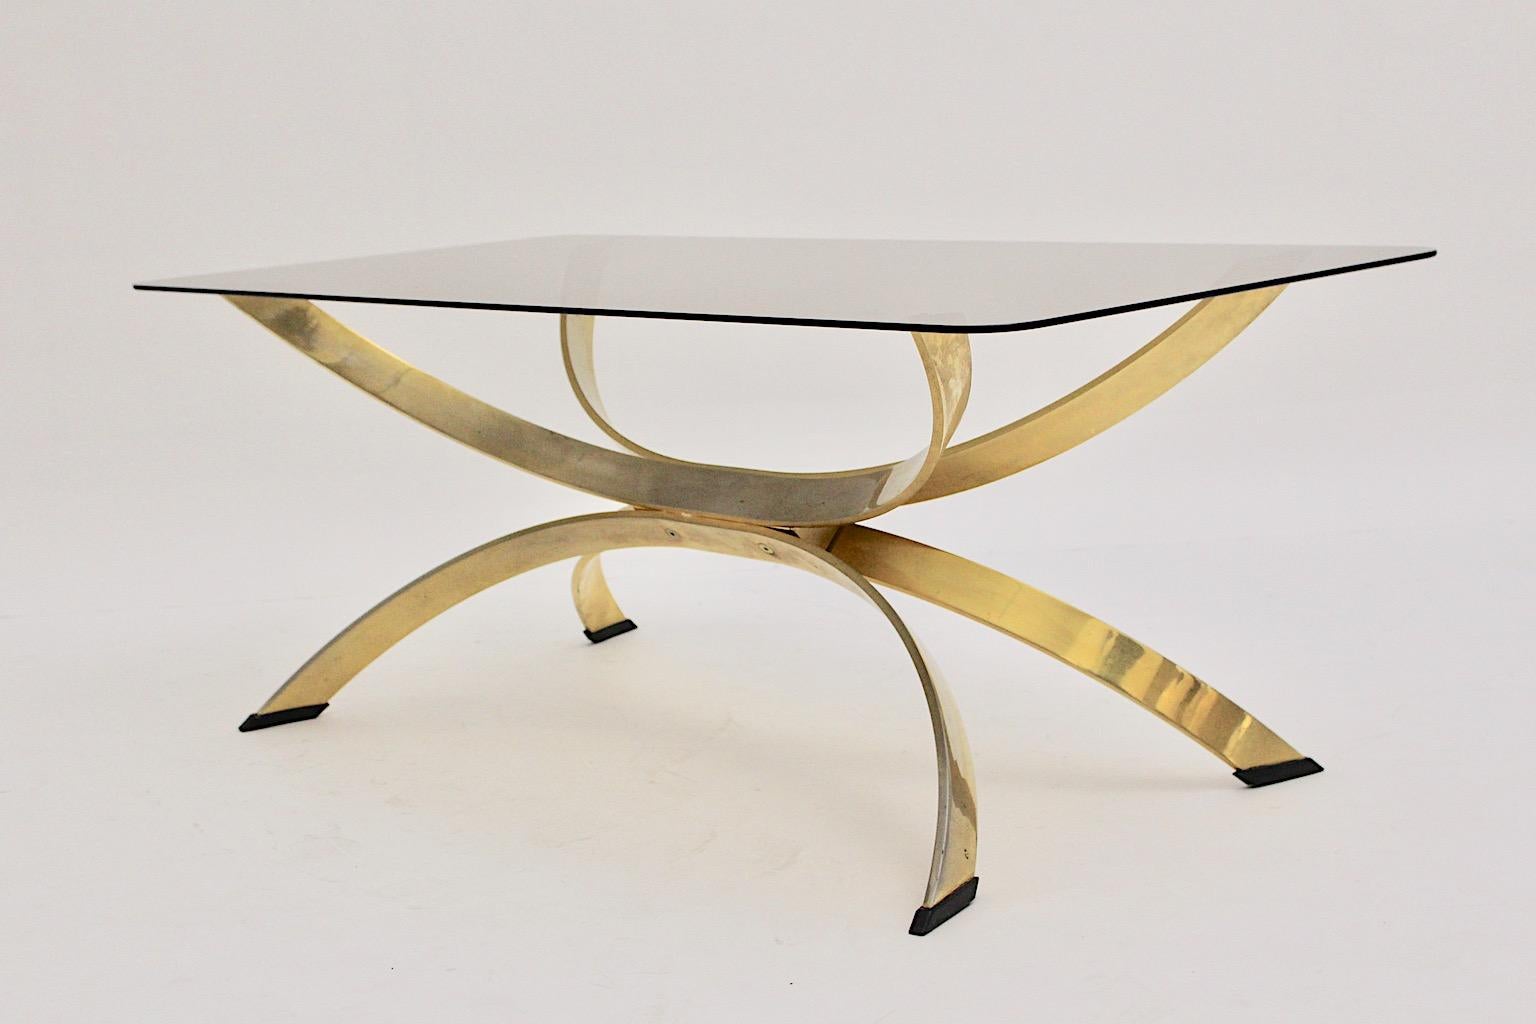 Brassed Metal Smoked Glass Sculptural Vintage Coffee Table Sofa Table 1970s For Sale 2